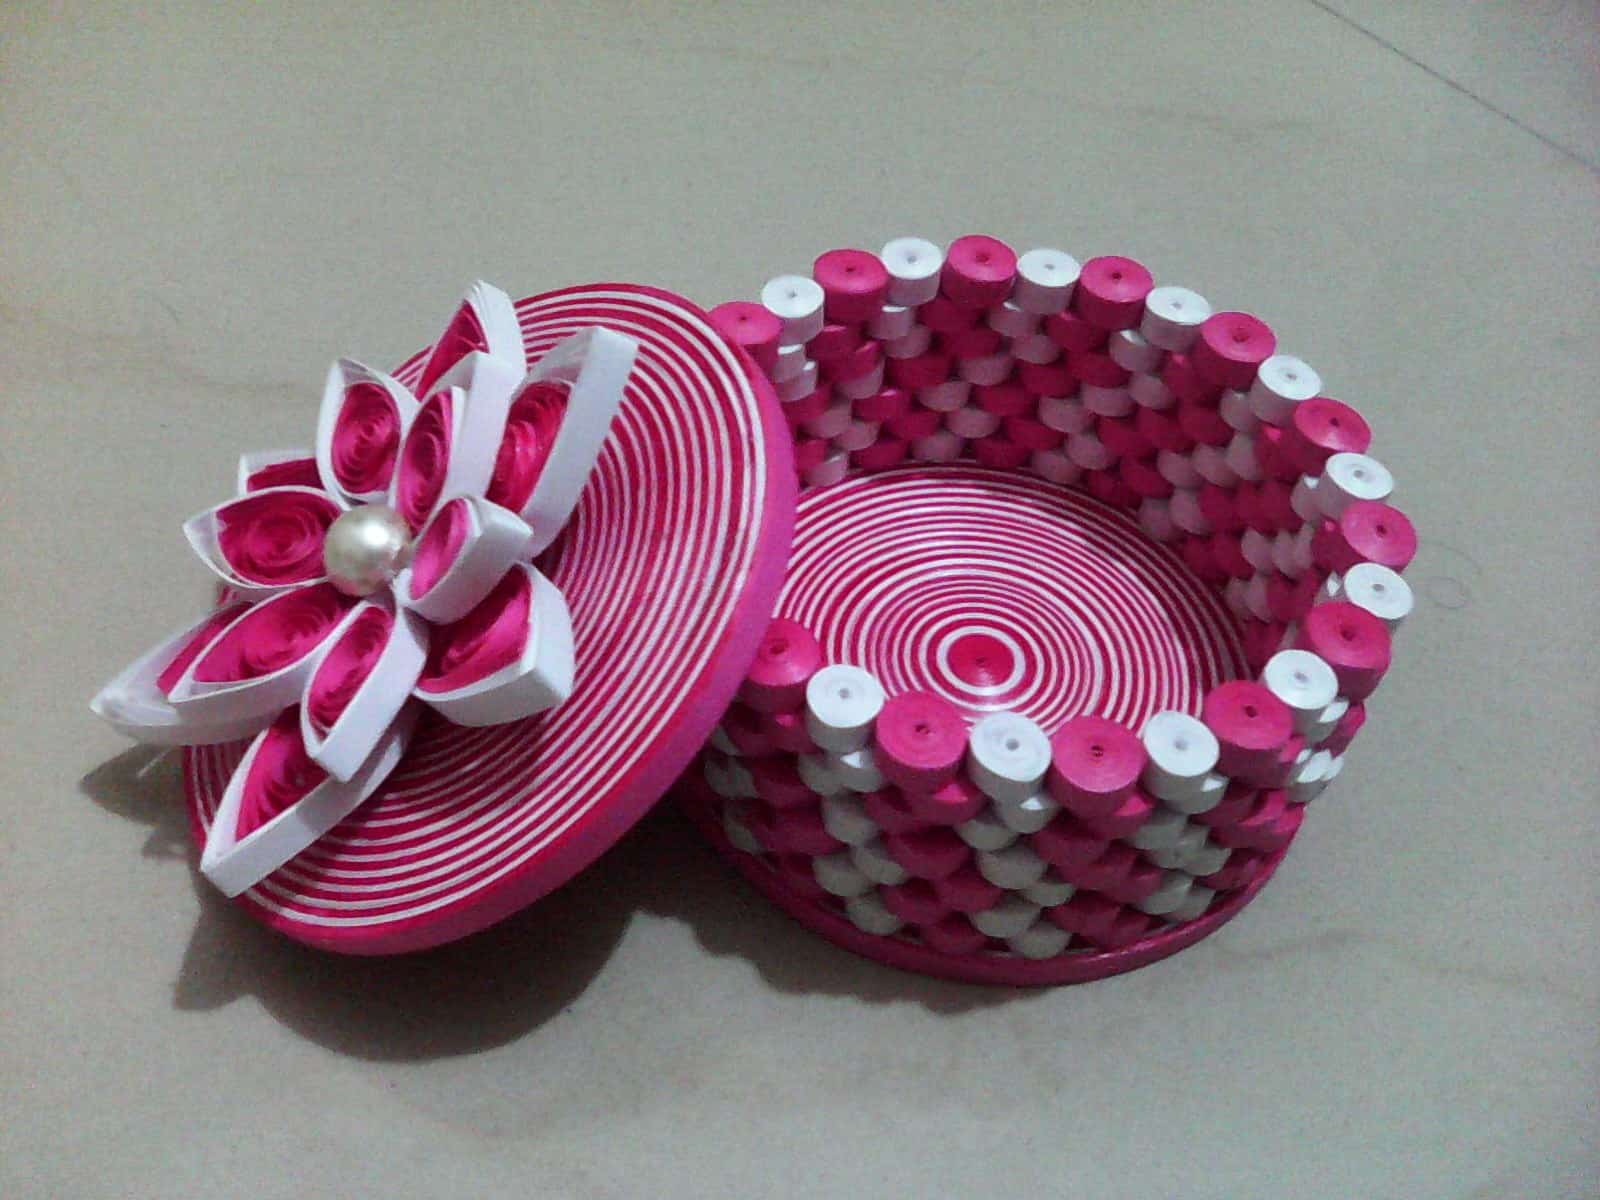 3D quilled gift box